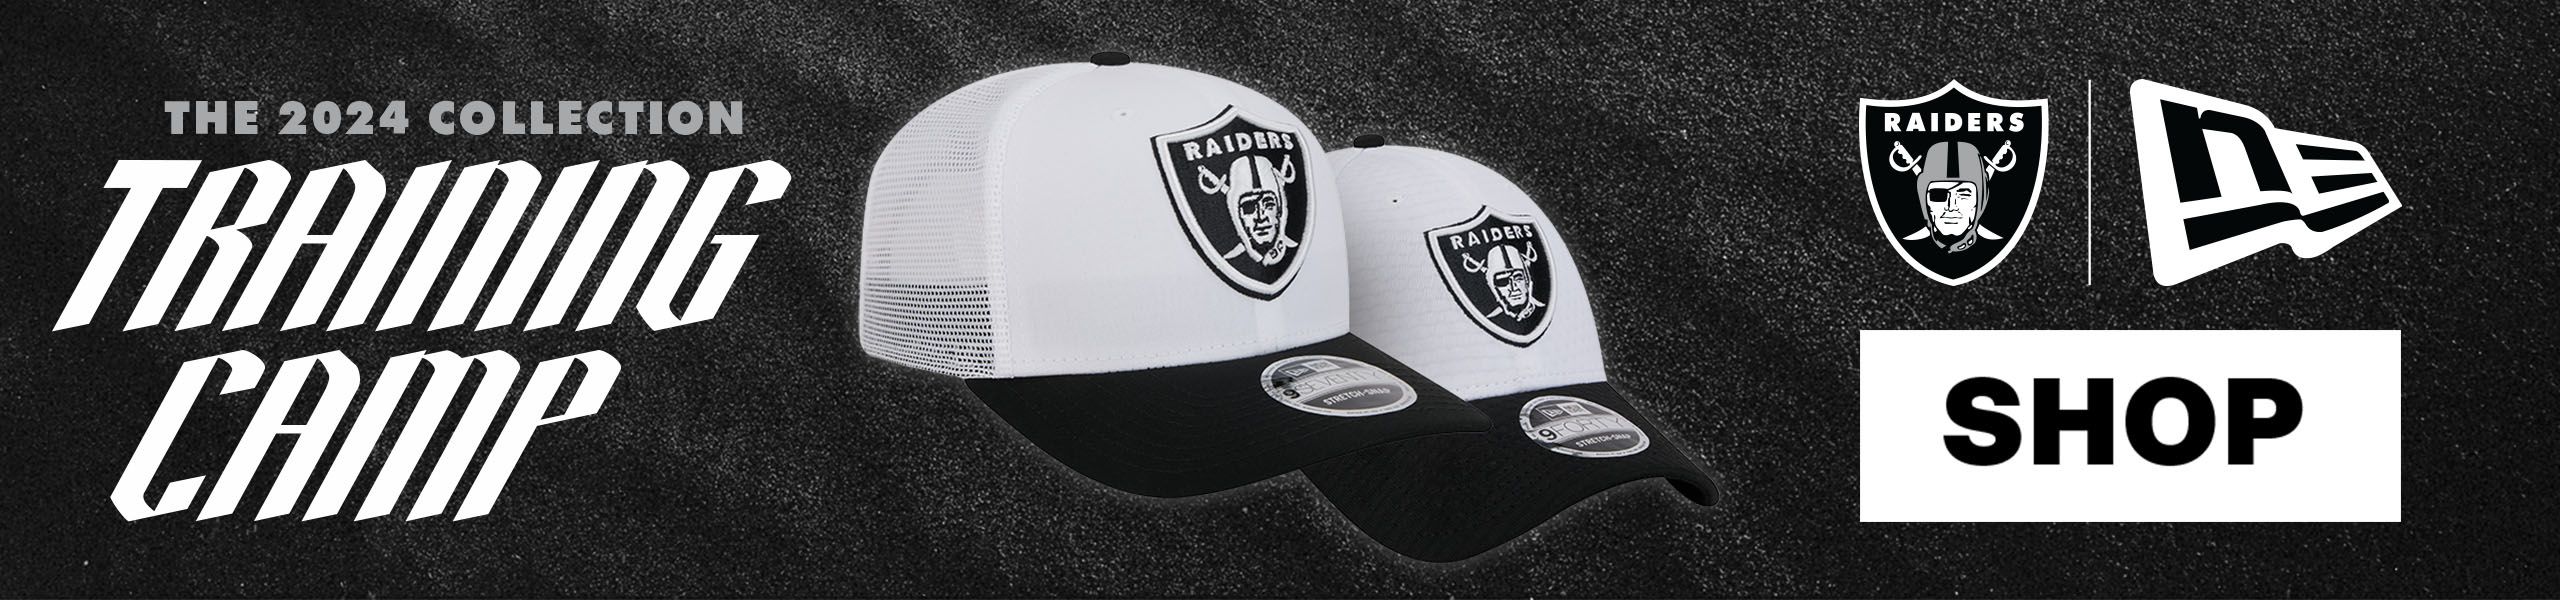 Shop the 2024 Training Camp Collection at The Raider Image